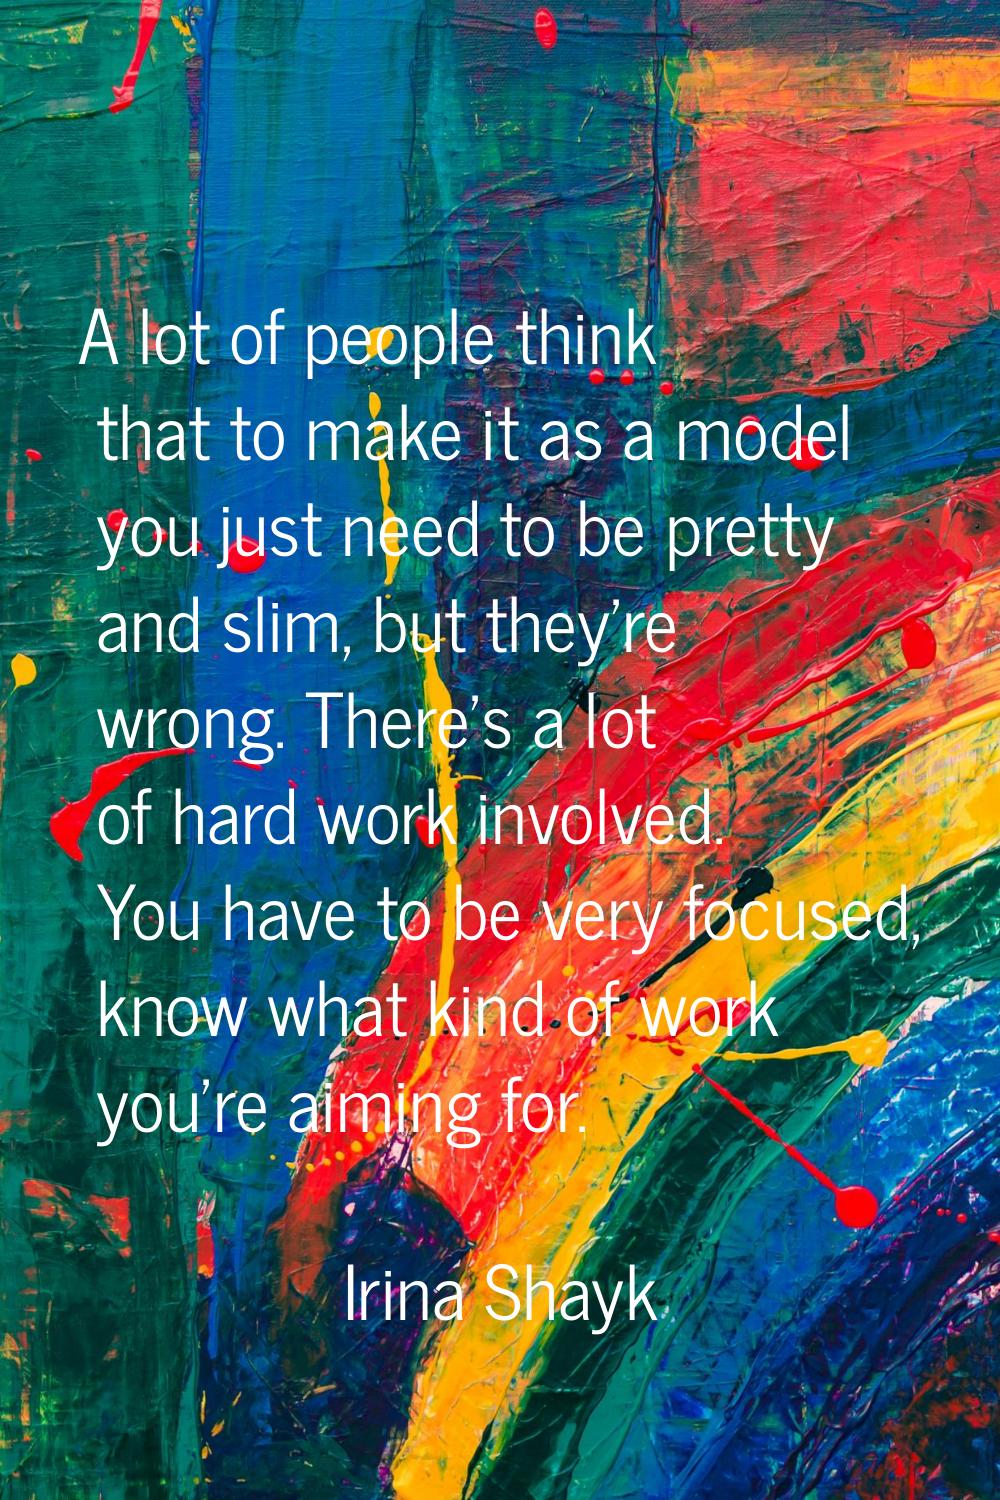 A lot of people think that to make it as a model you just need to be pretty and slim, but they're w